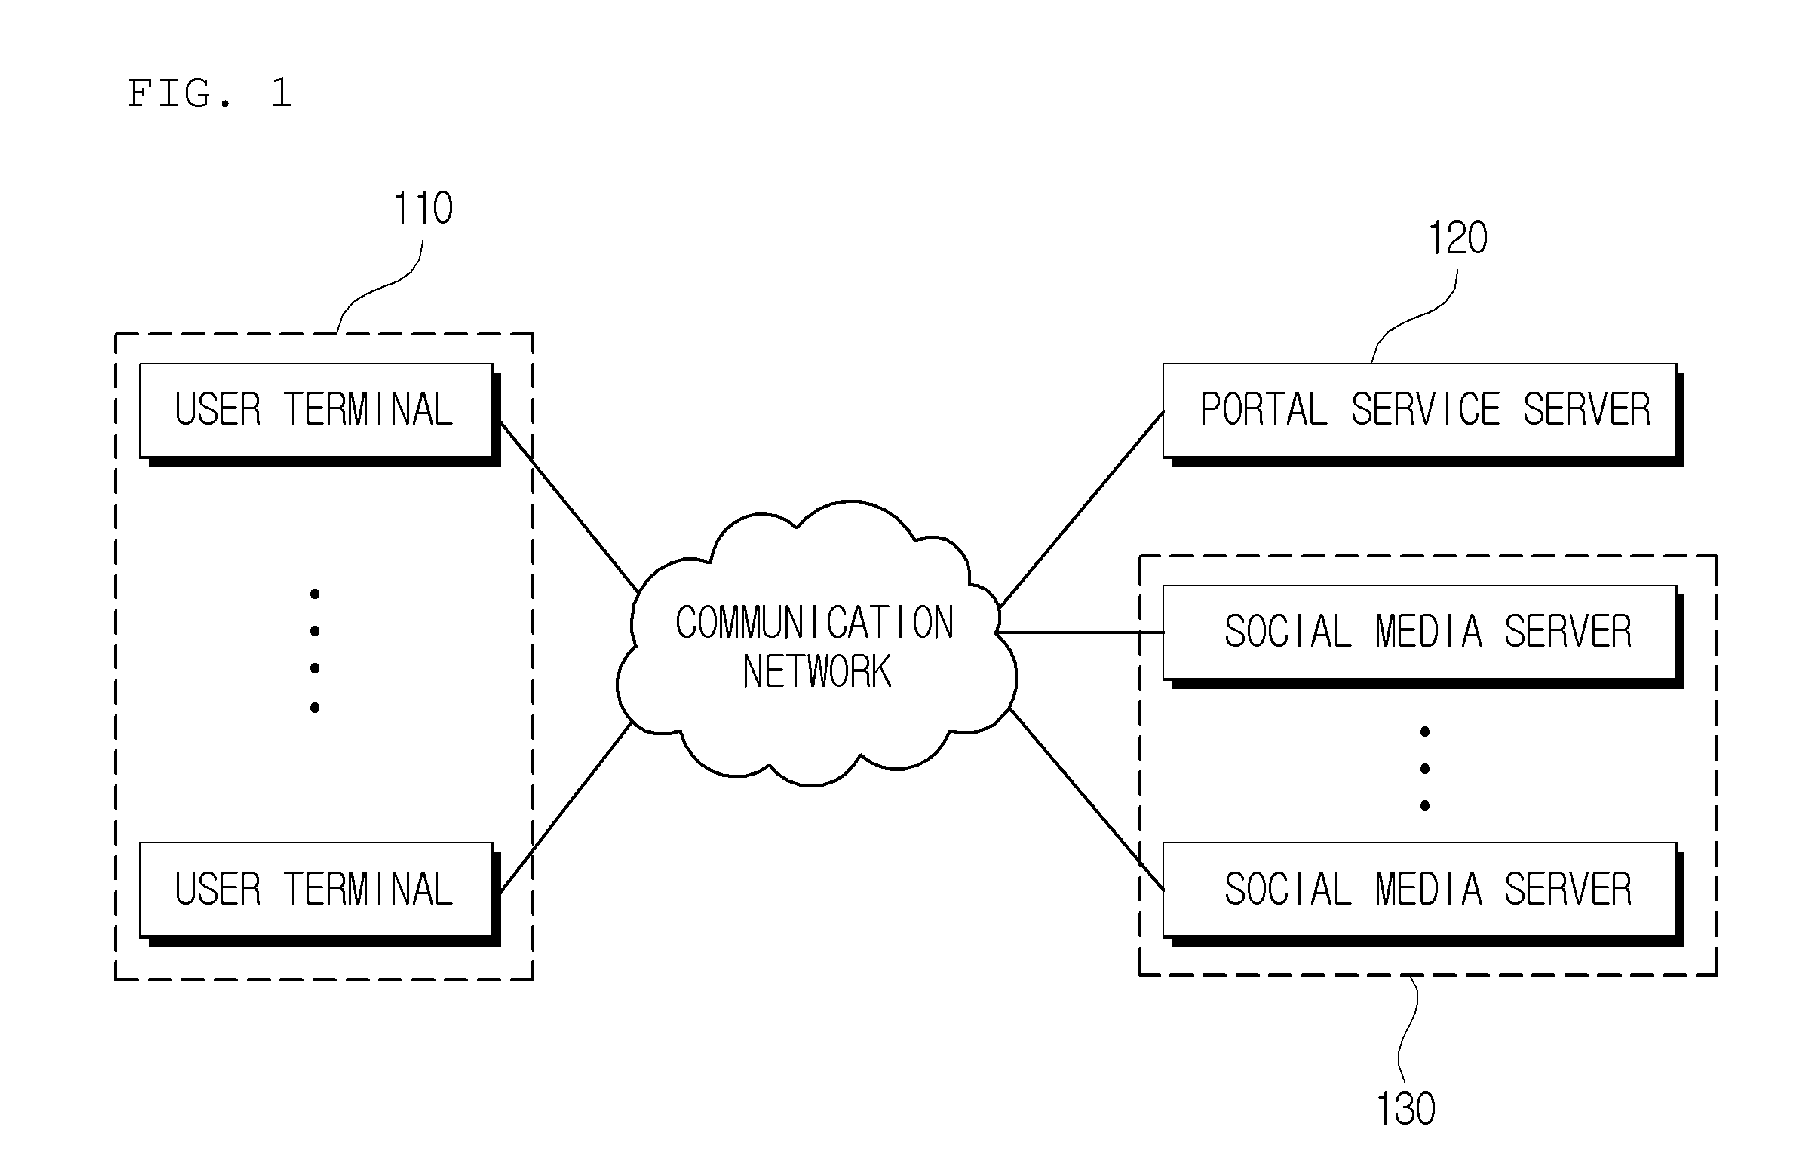 Apparatus, system, and method for detecting complex issues based on social media analysis